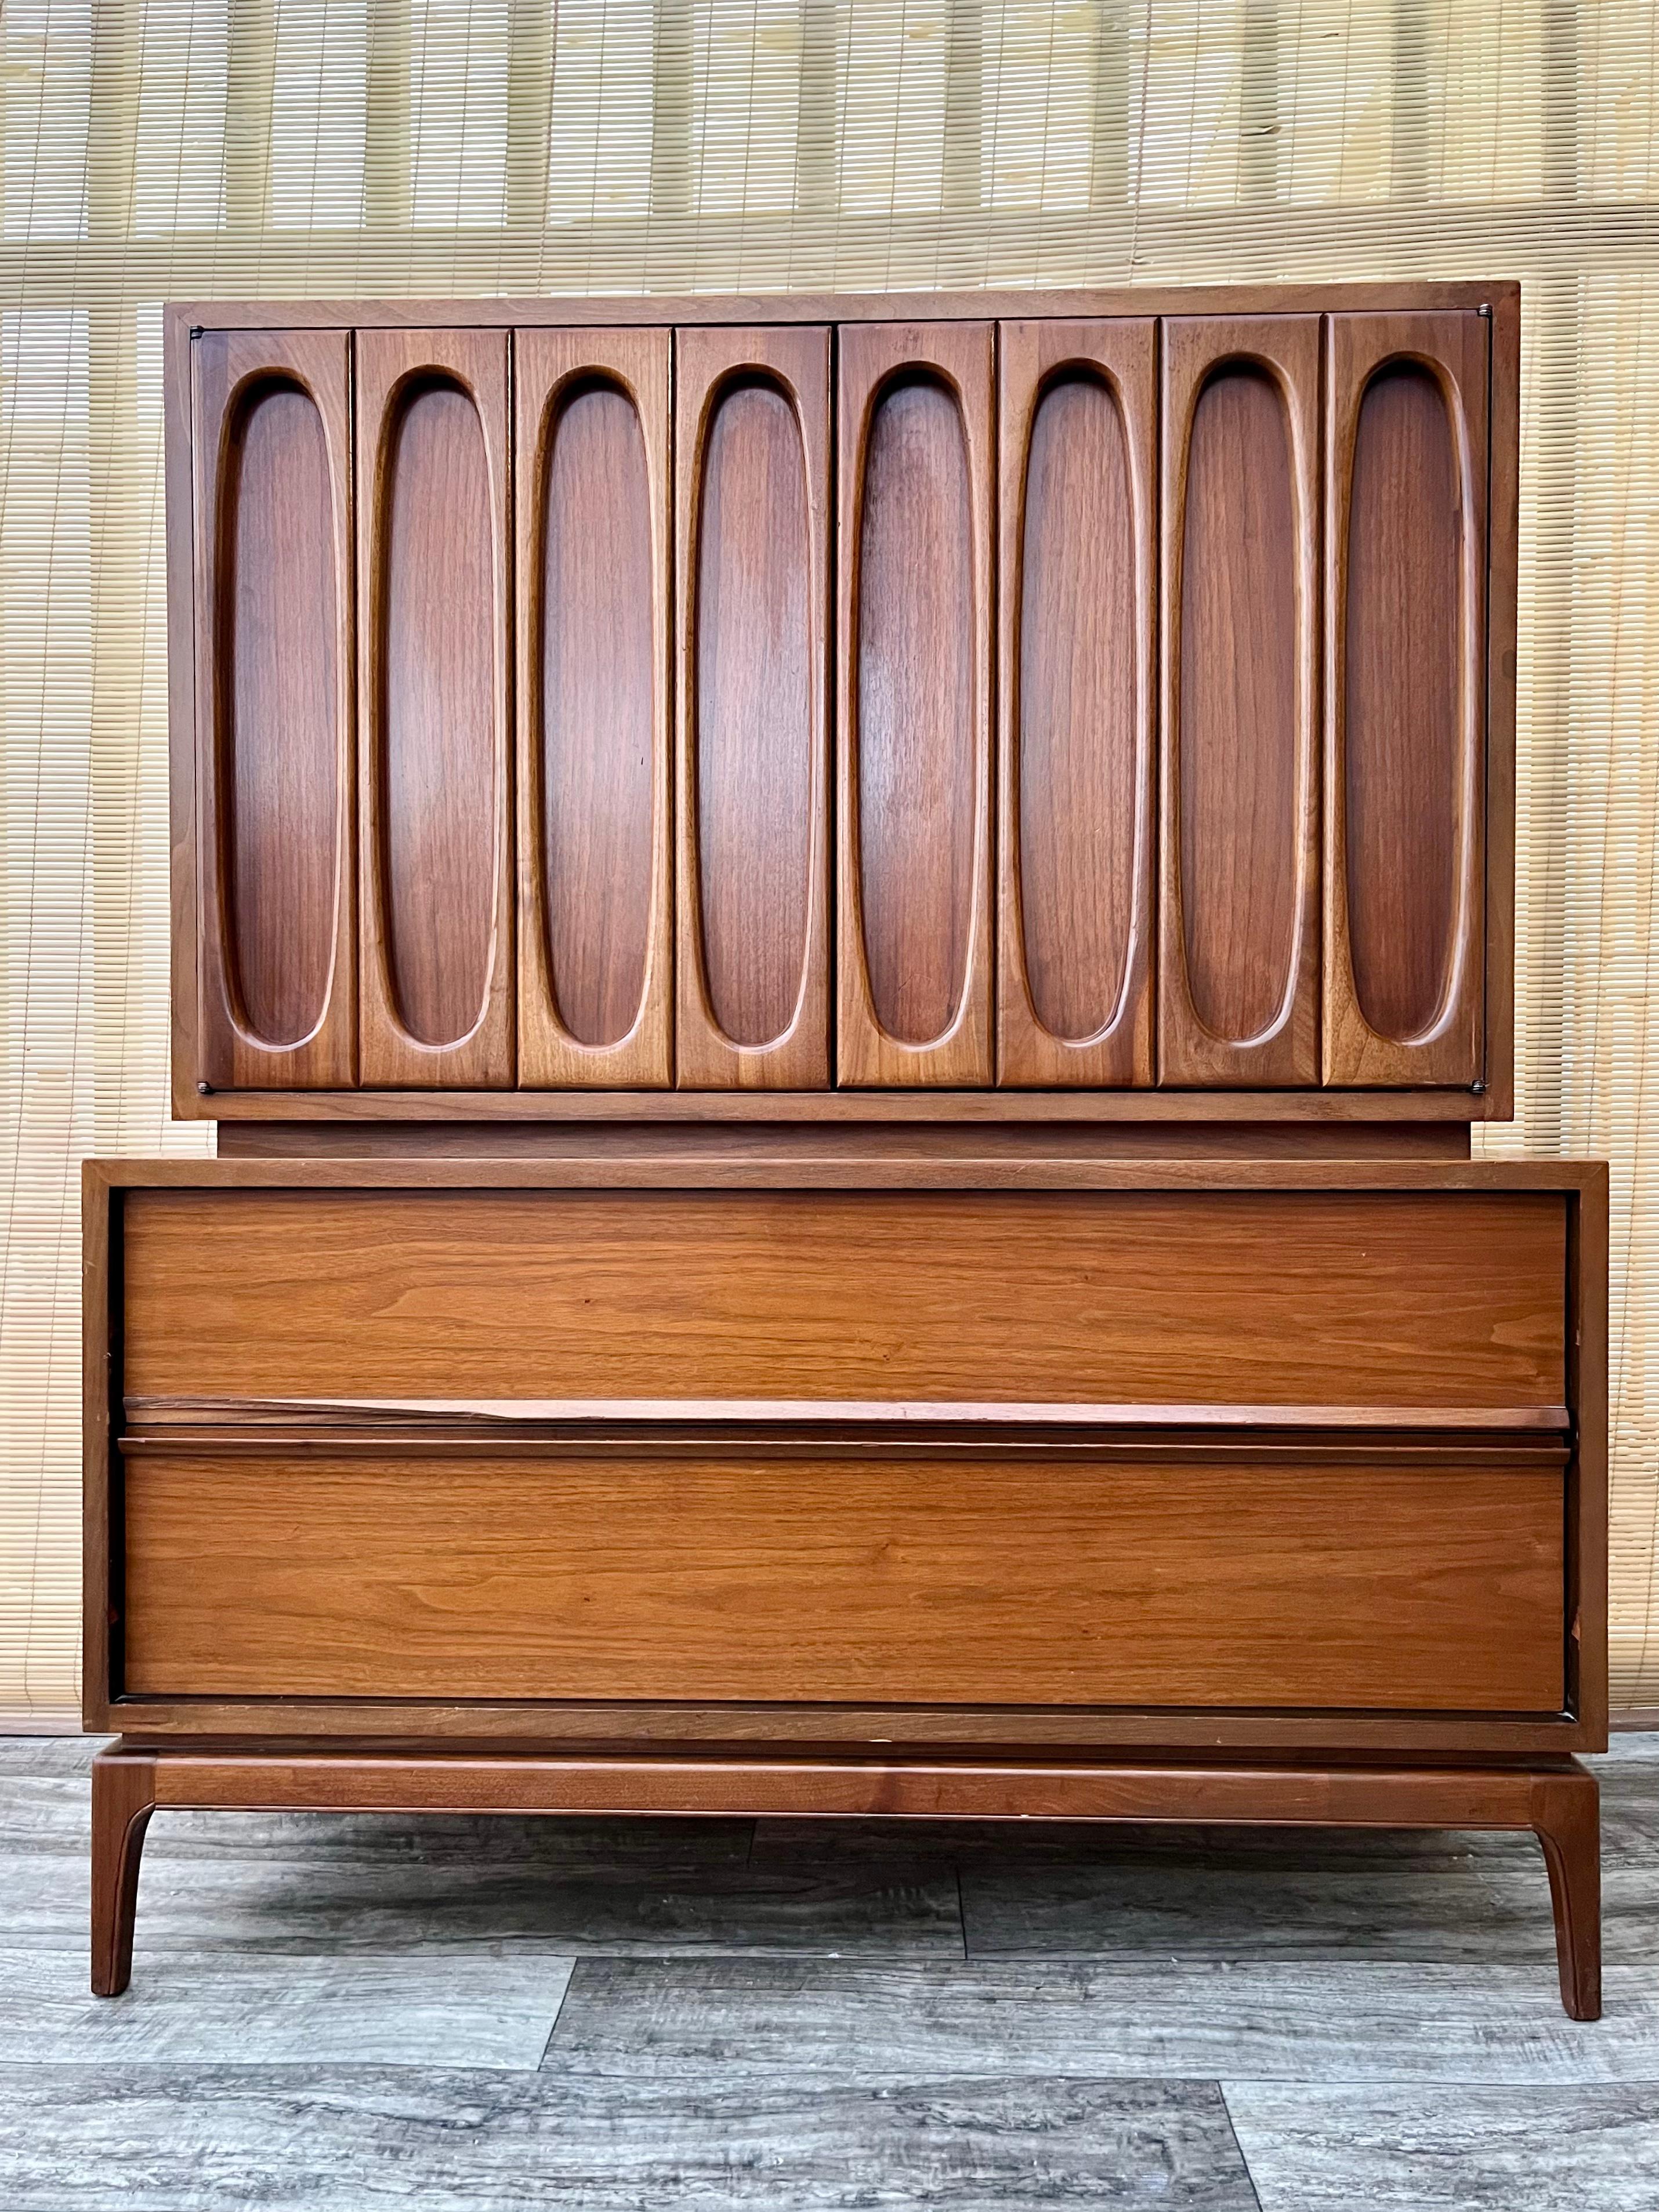 Vintage Mid Century Modern Brutalist Inspired Highboy Dresser. Circa 1960s.
Feature a monumental look with brutalist inspired designed doors, a beautiful walnut wood grain finish, and five drawers offering plenty of storage space. 
In good original